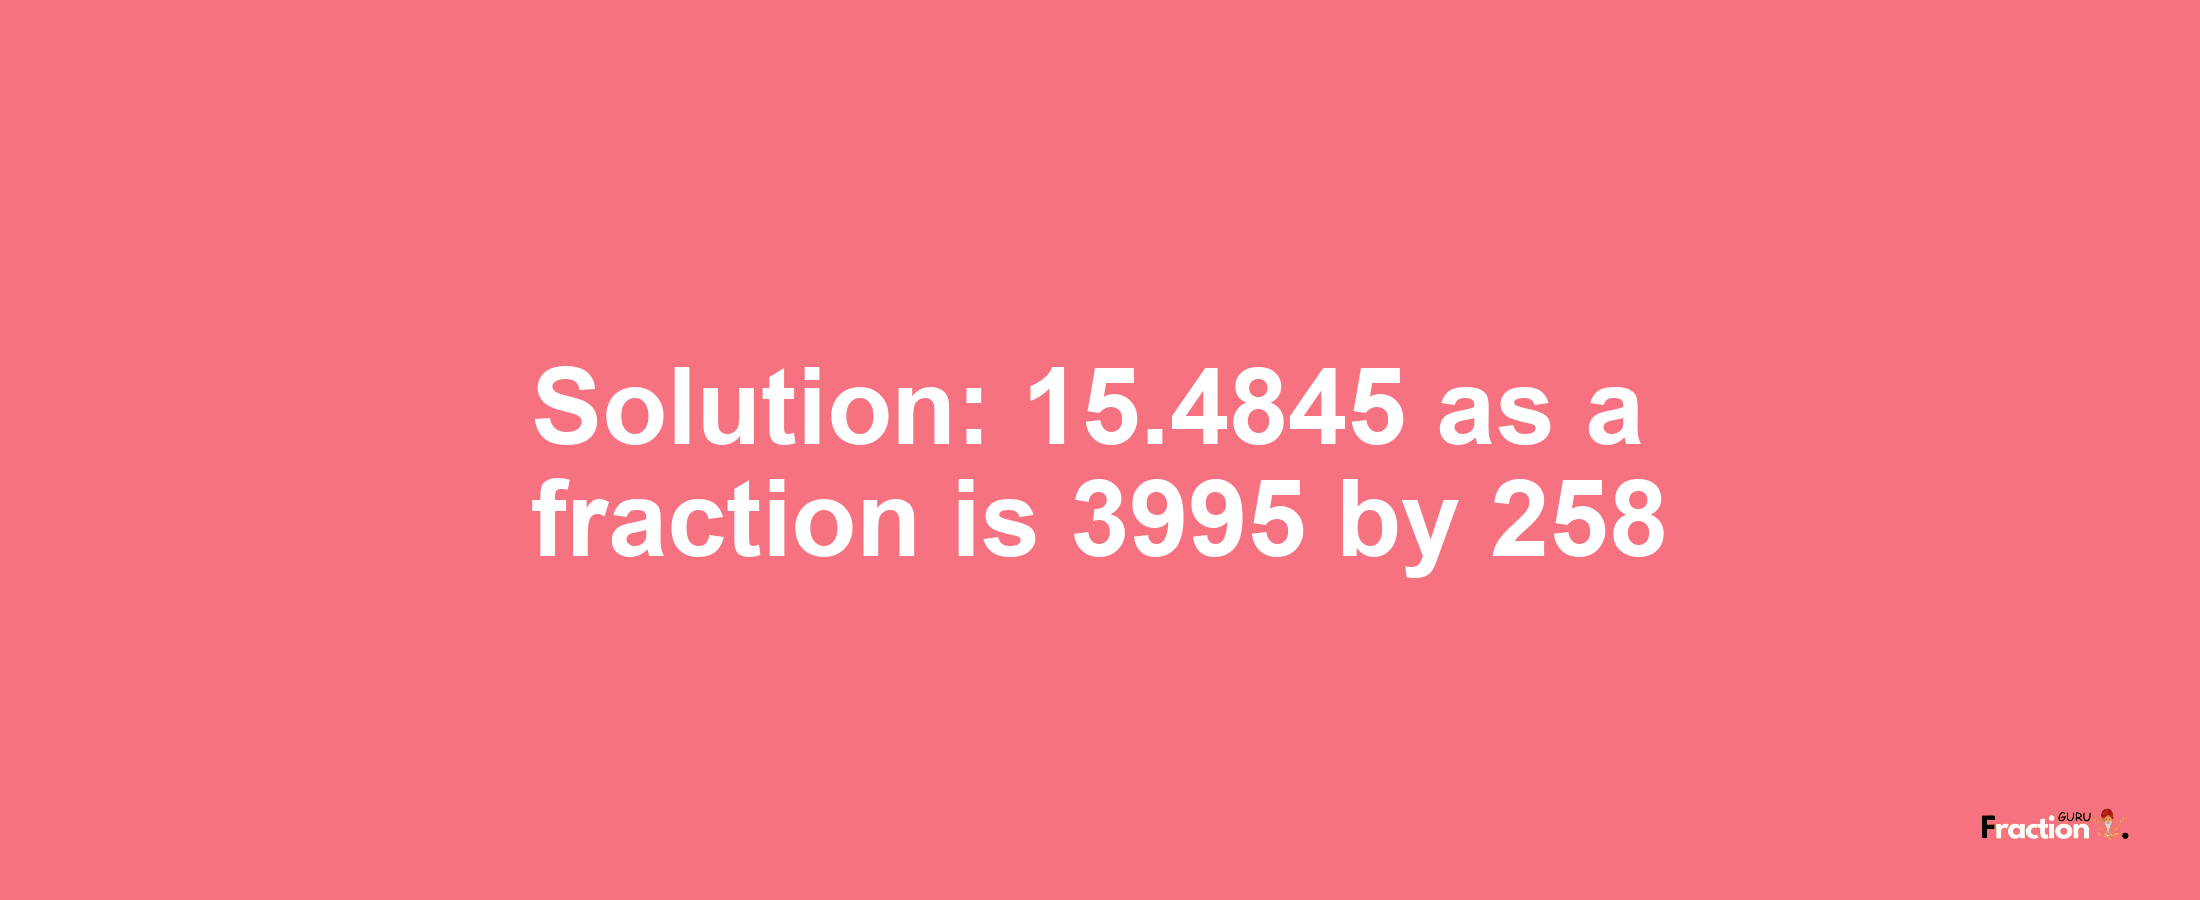 Solution:15.4845 as a fraction is 3995/258